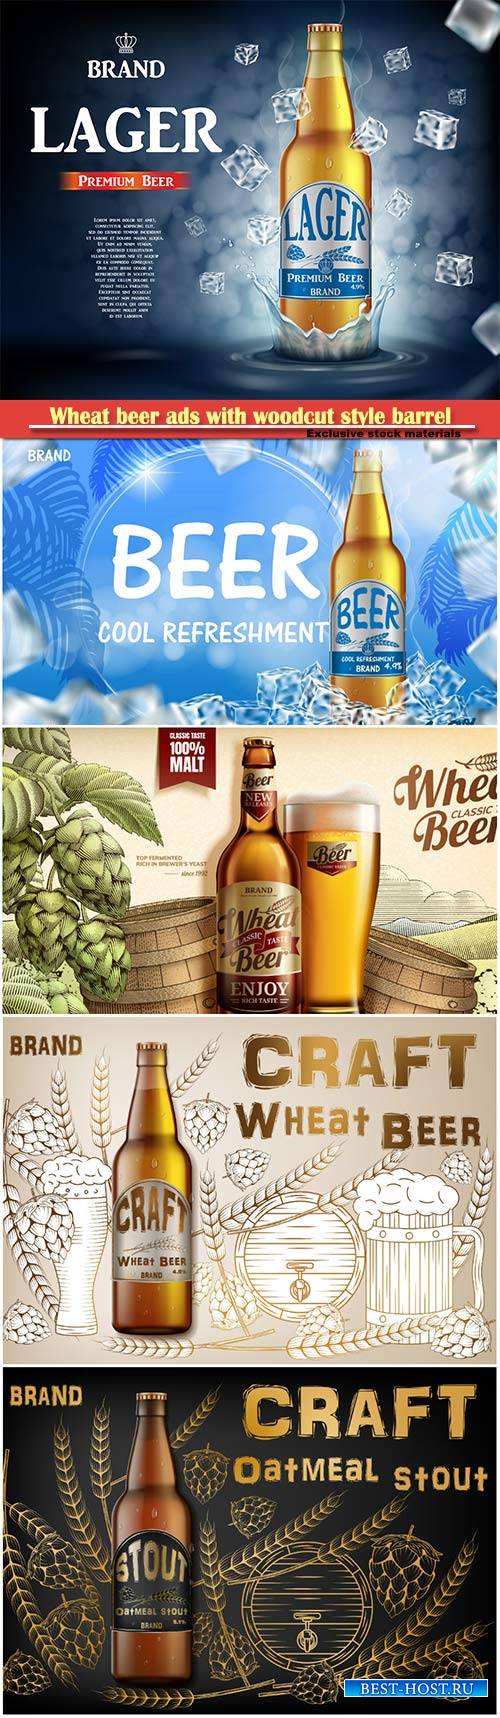 Wheat beer ads with woodcut style barrel and hops elements, 3d illustration ...